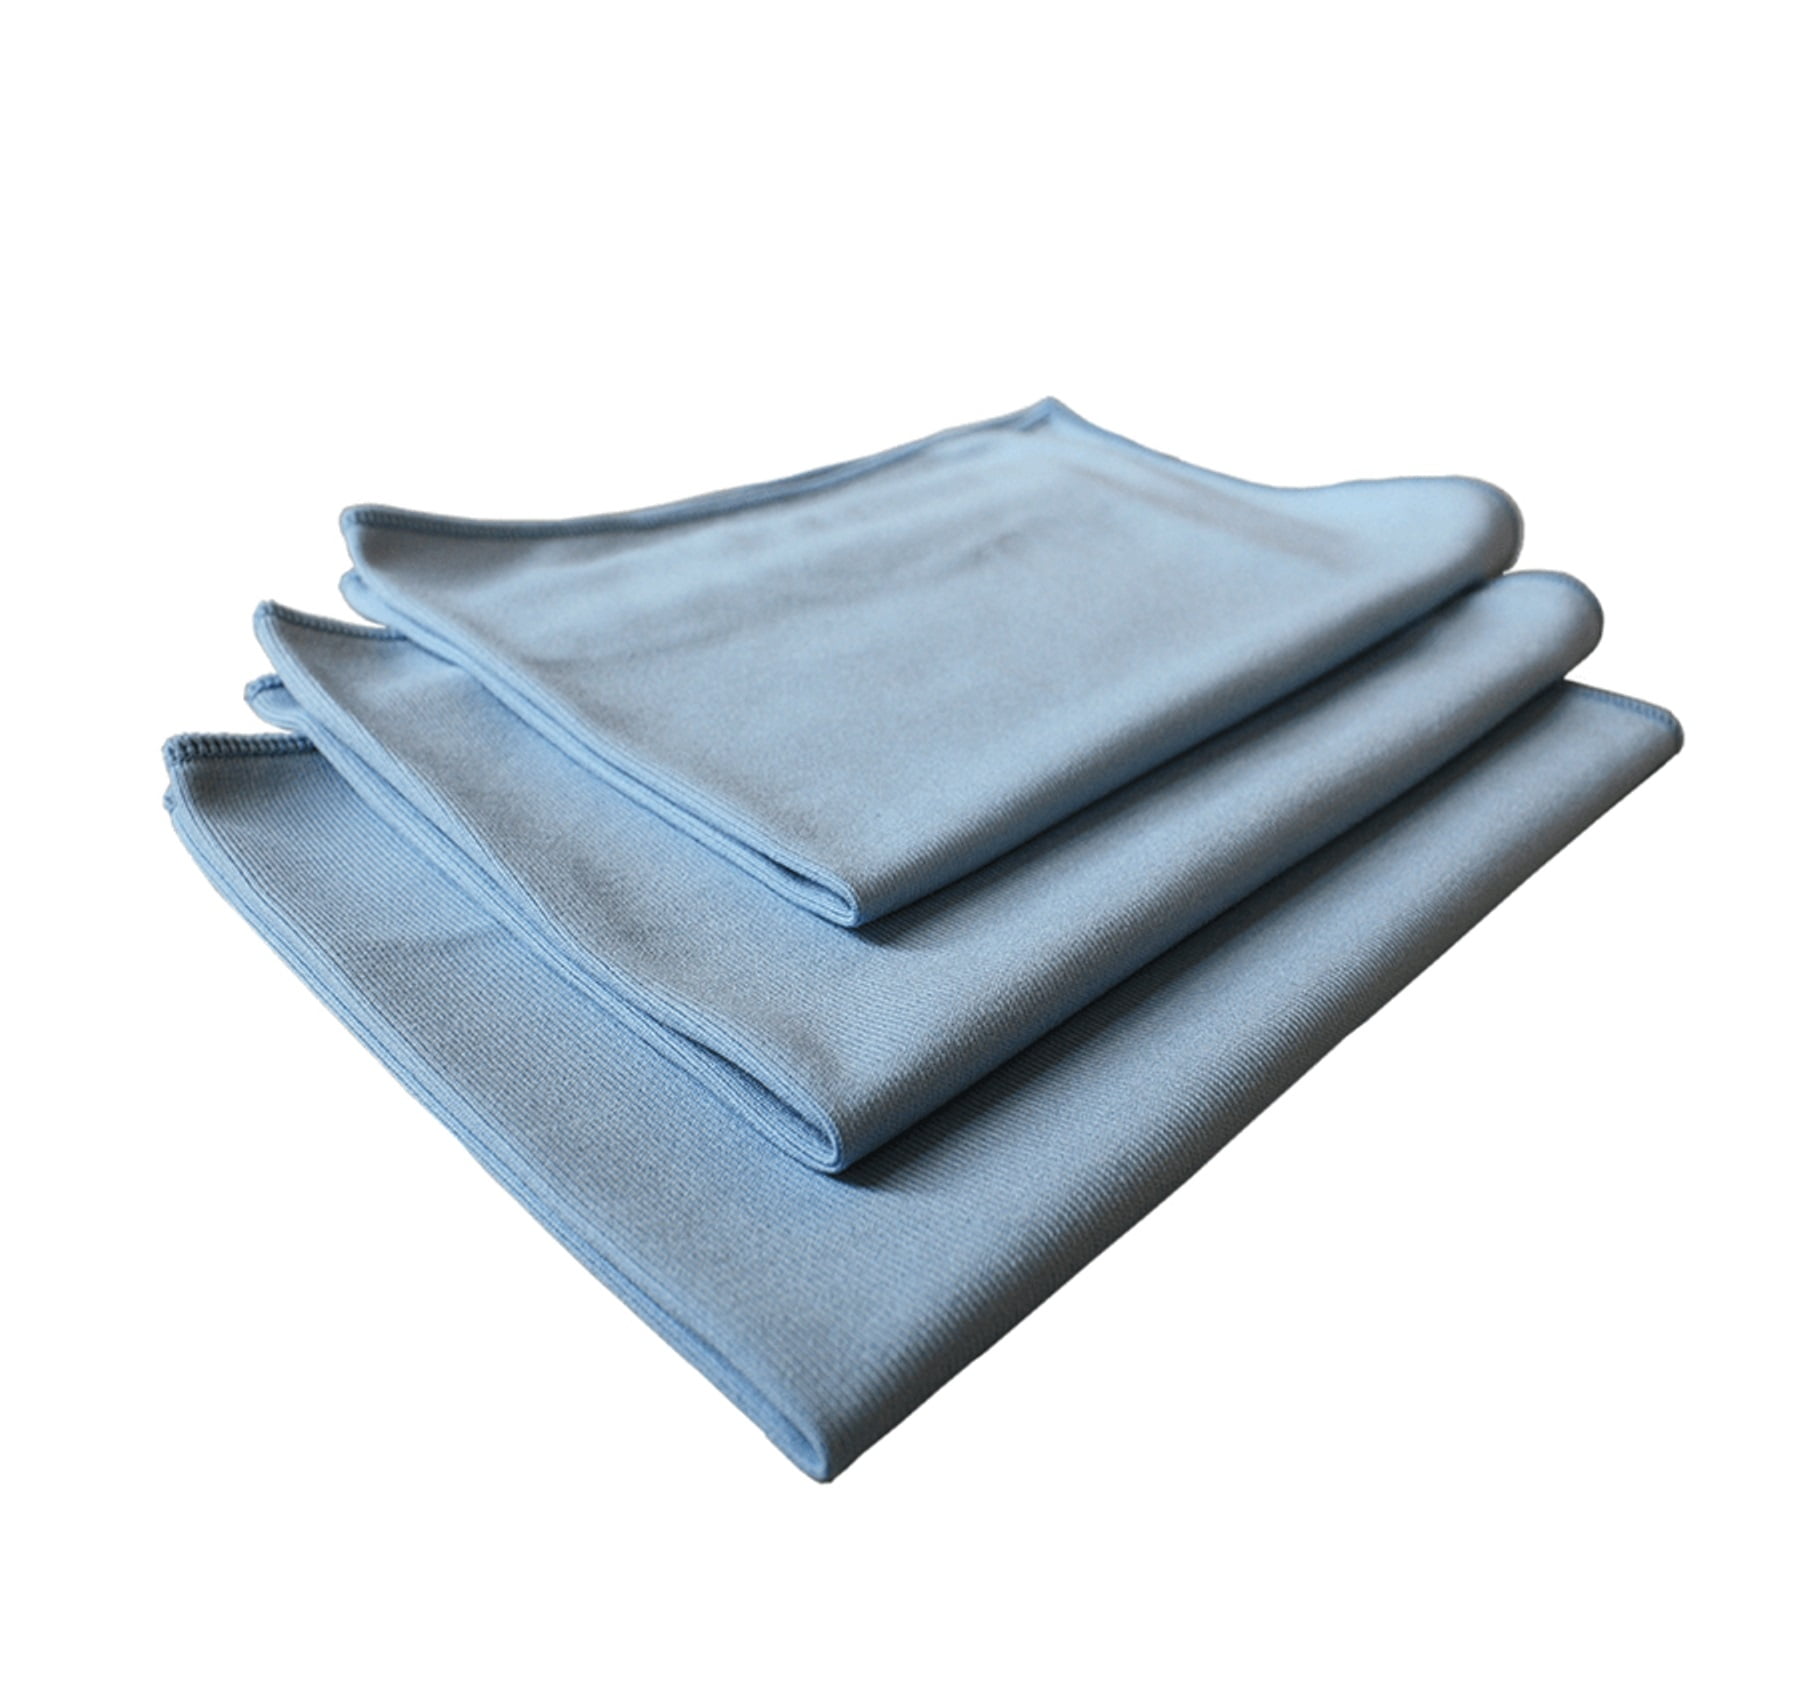 Professional Microfiber glass cloths amazing quality by Smart Choice 